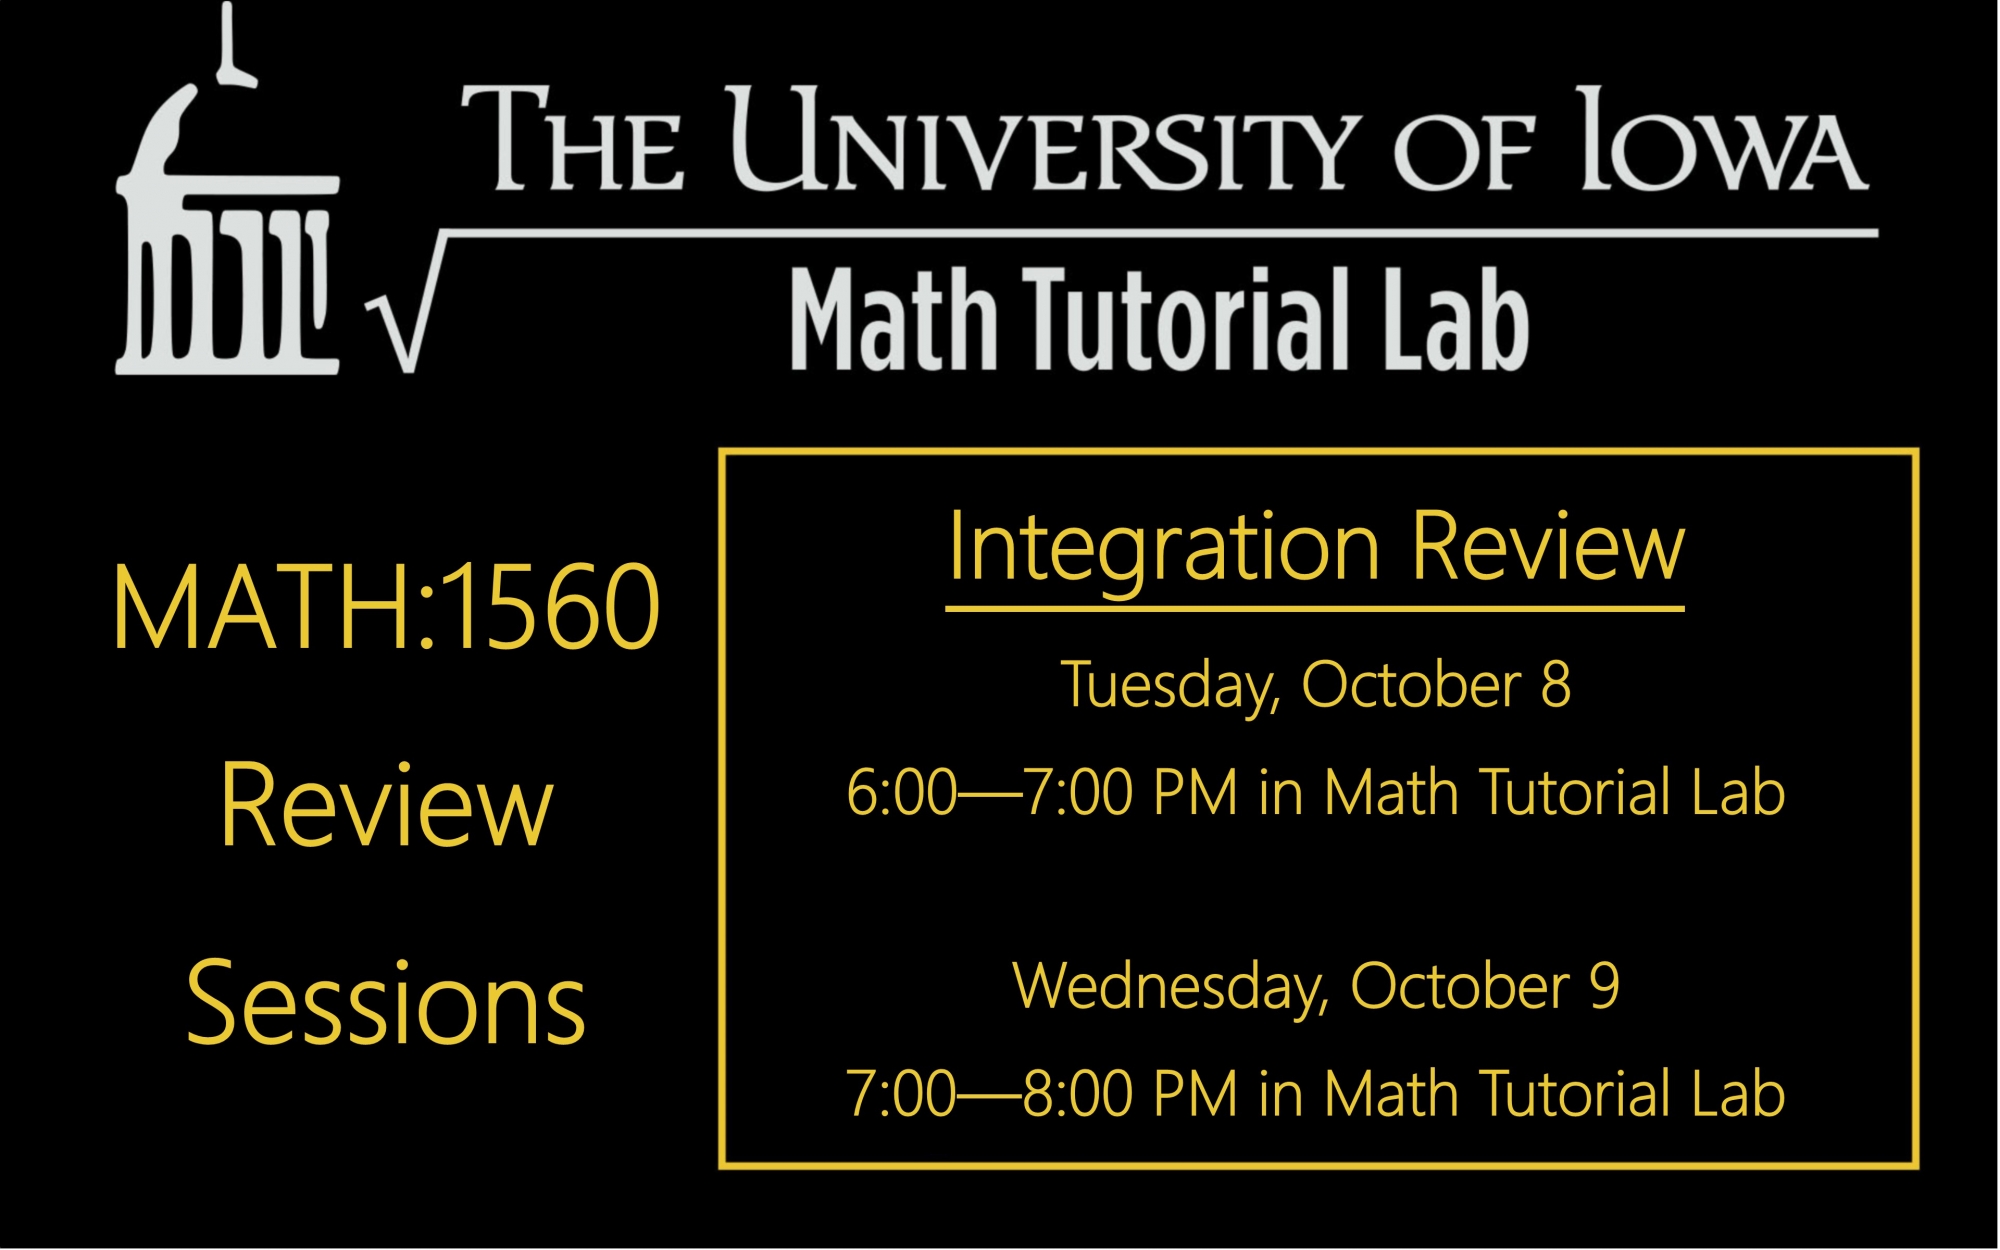 MATH:1560 Review Sessions Integration Review Tuesday, October 8 at 6:00 PM Wednesday, October 9 at 7:00 PM